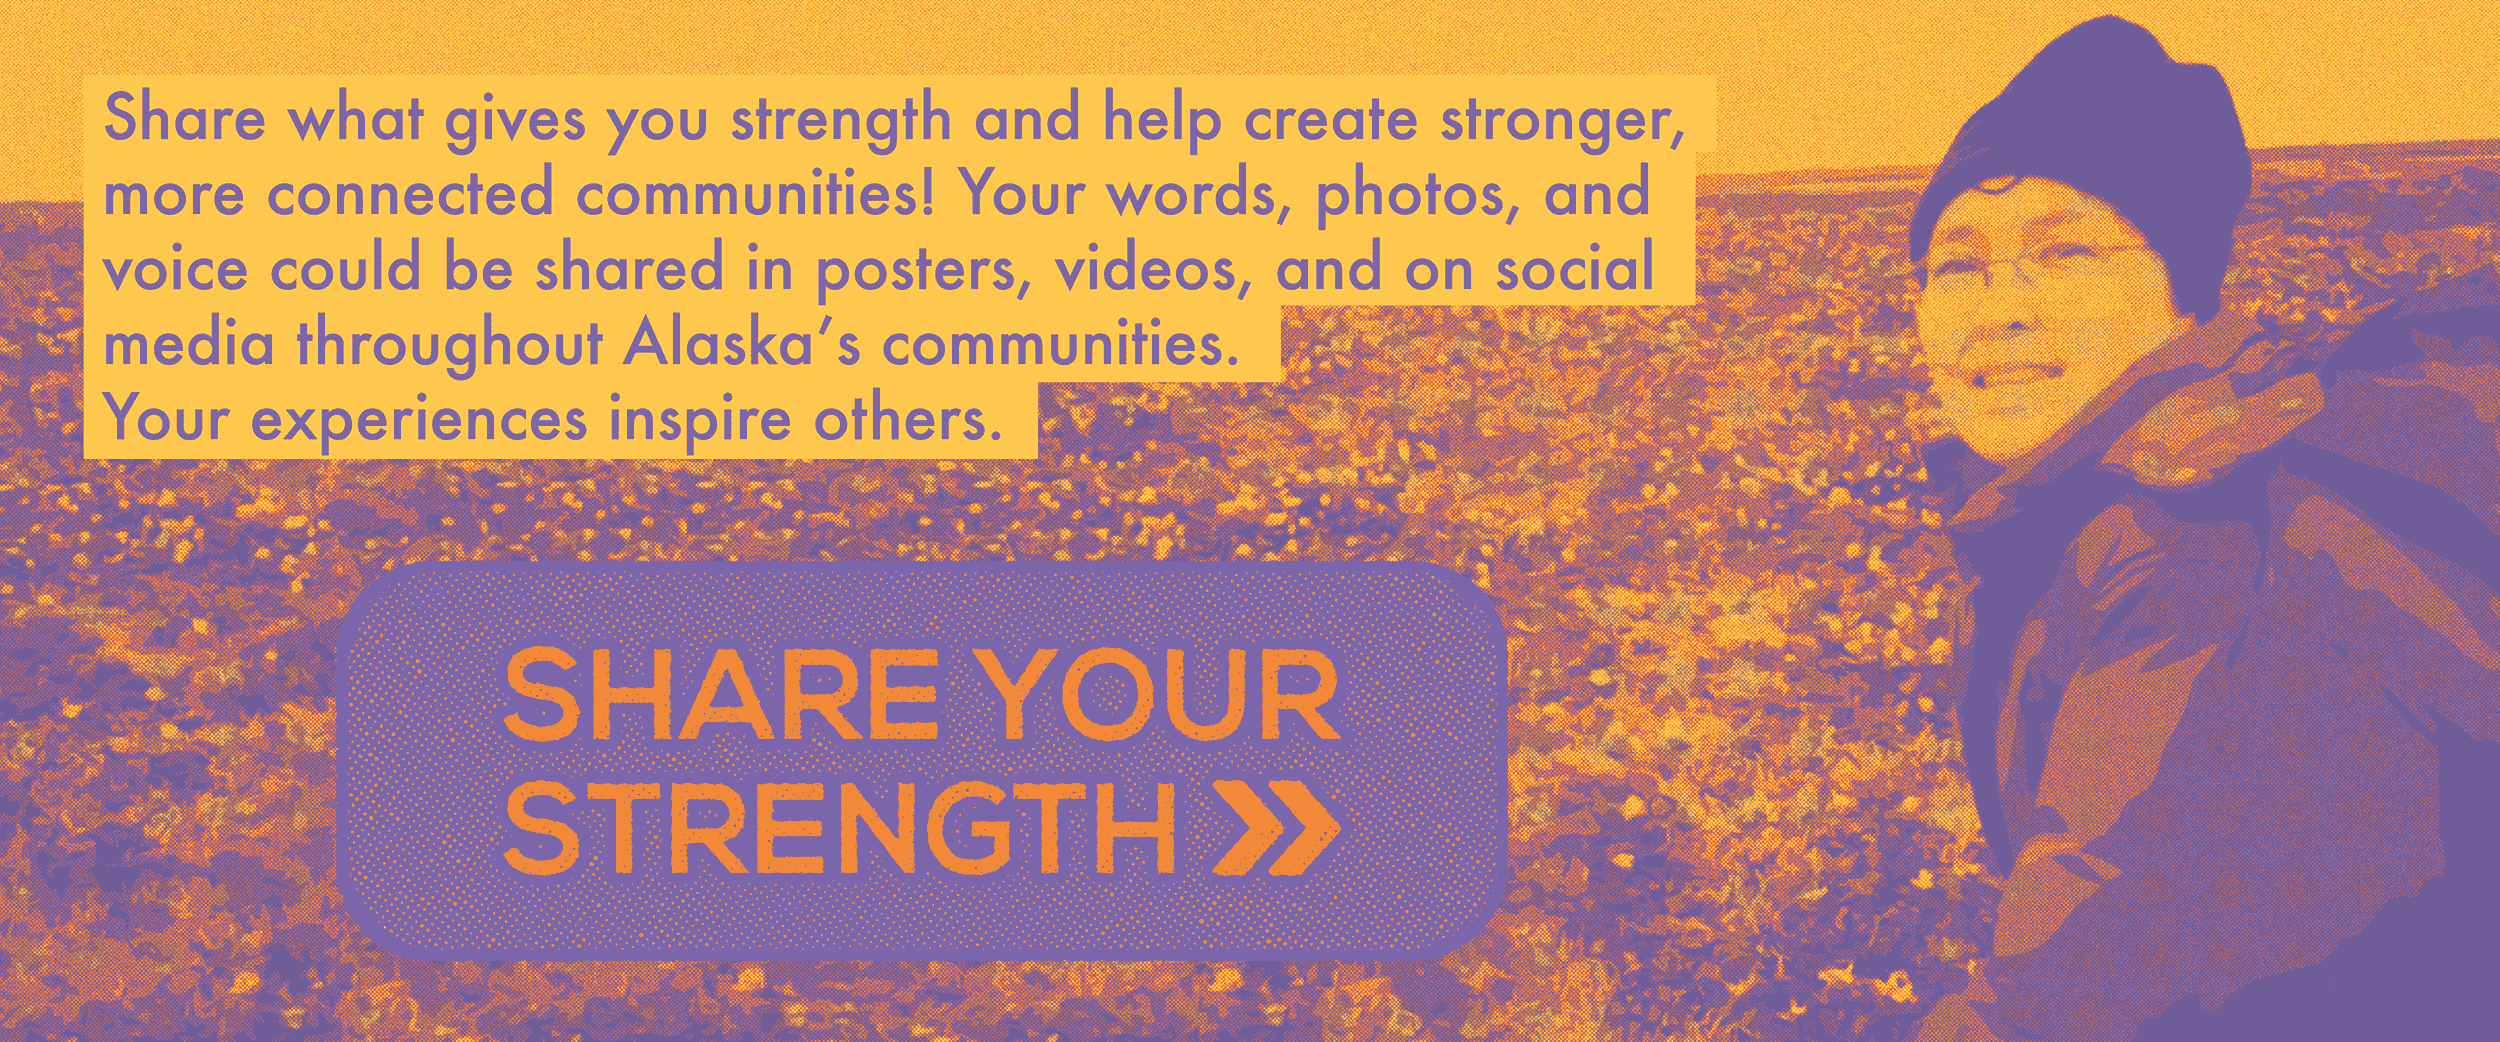 Share your strength